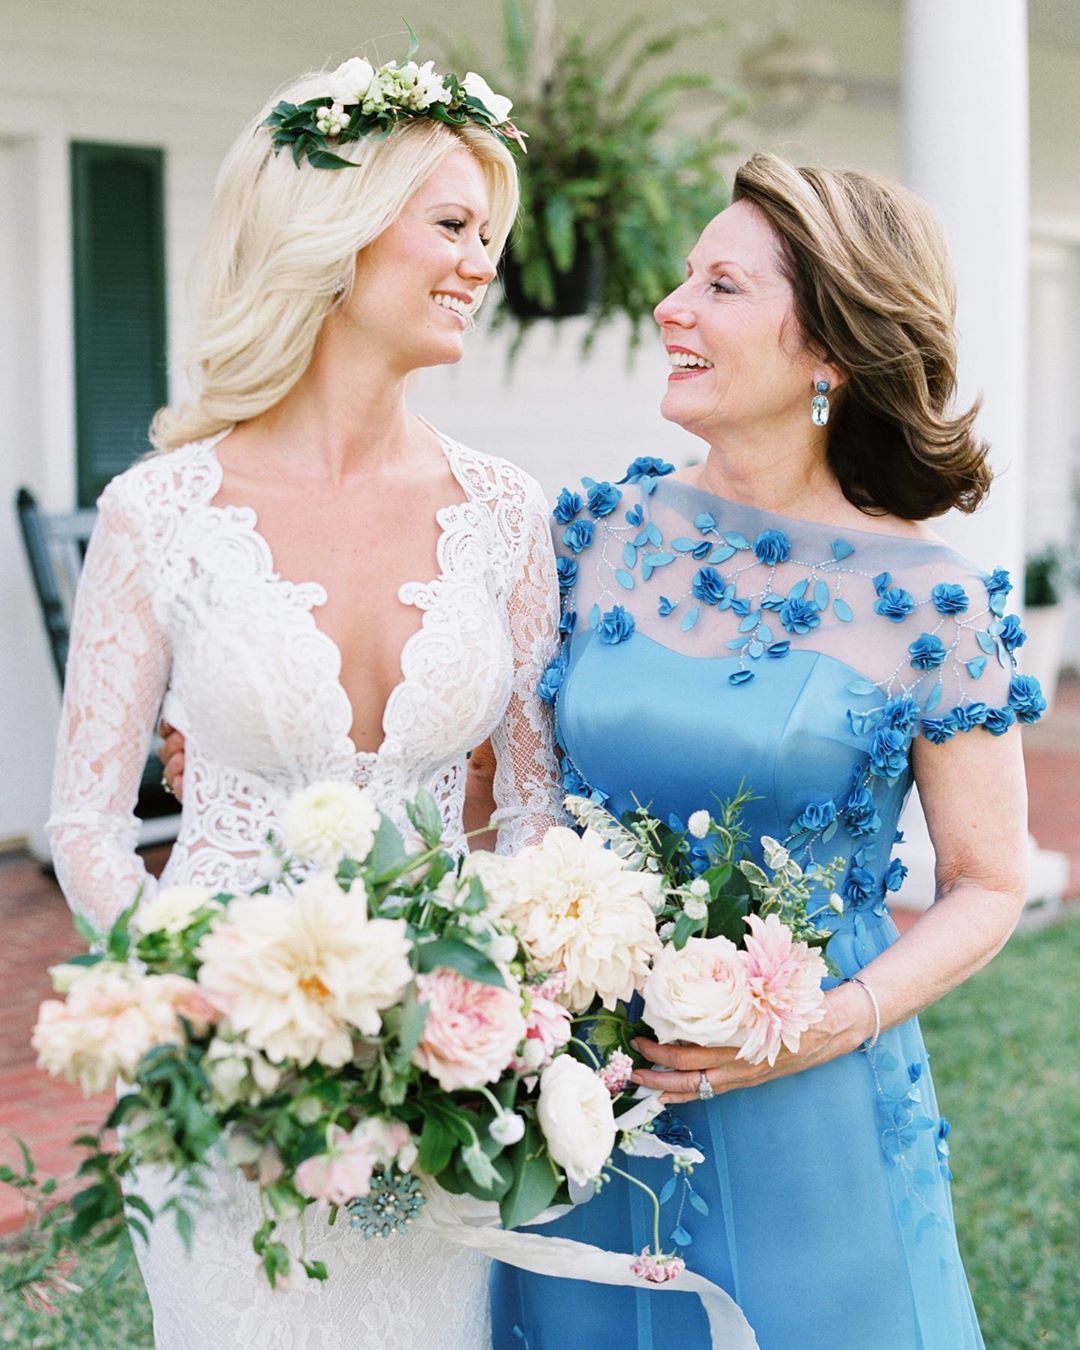 How to Choose Mother of the Bride Dress